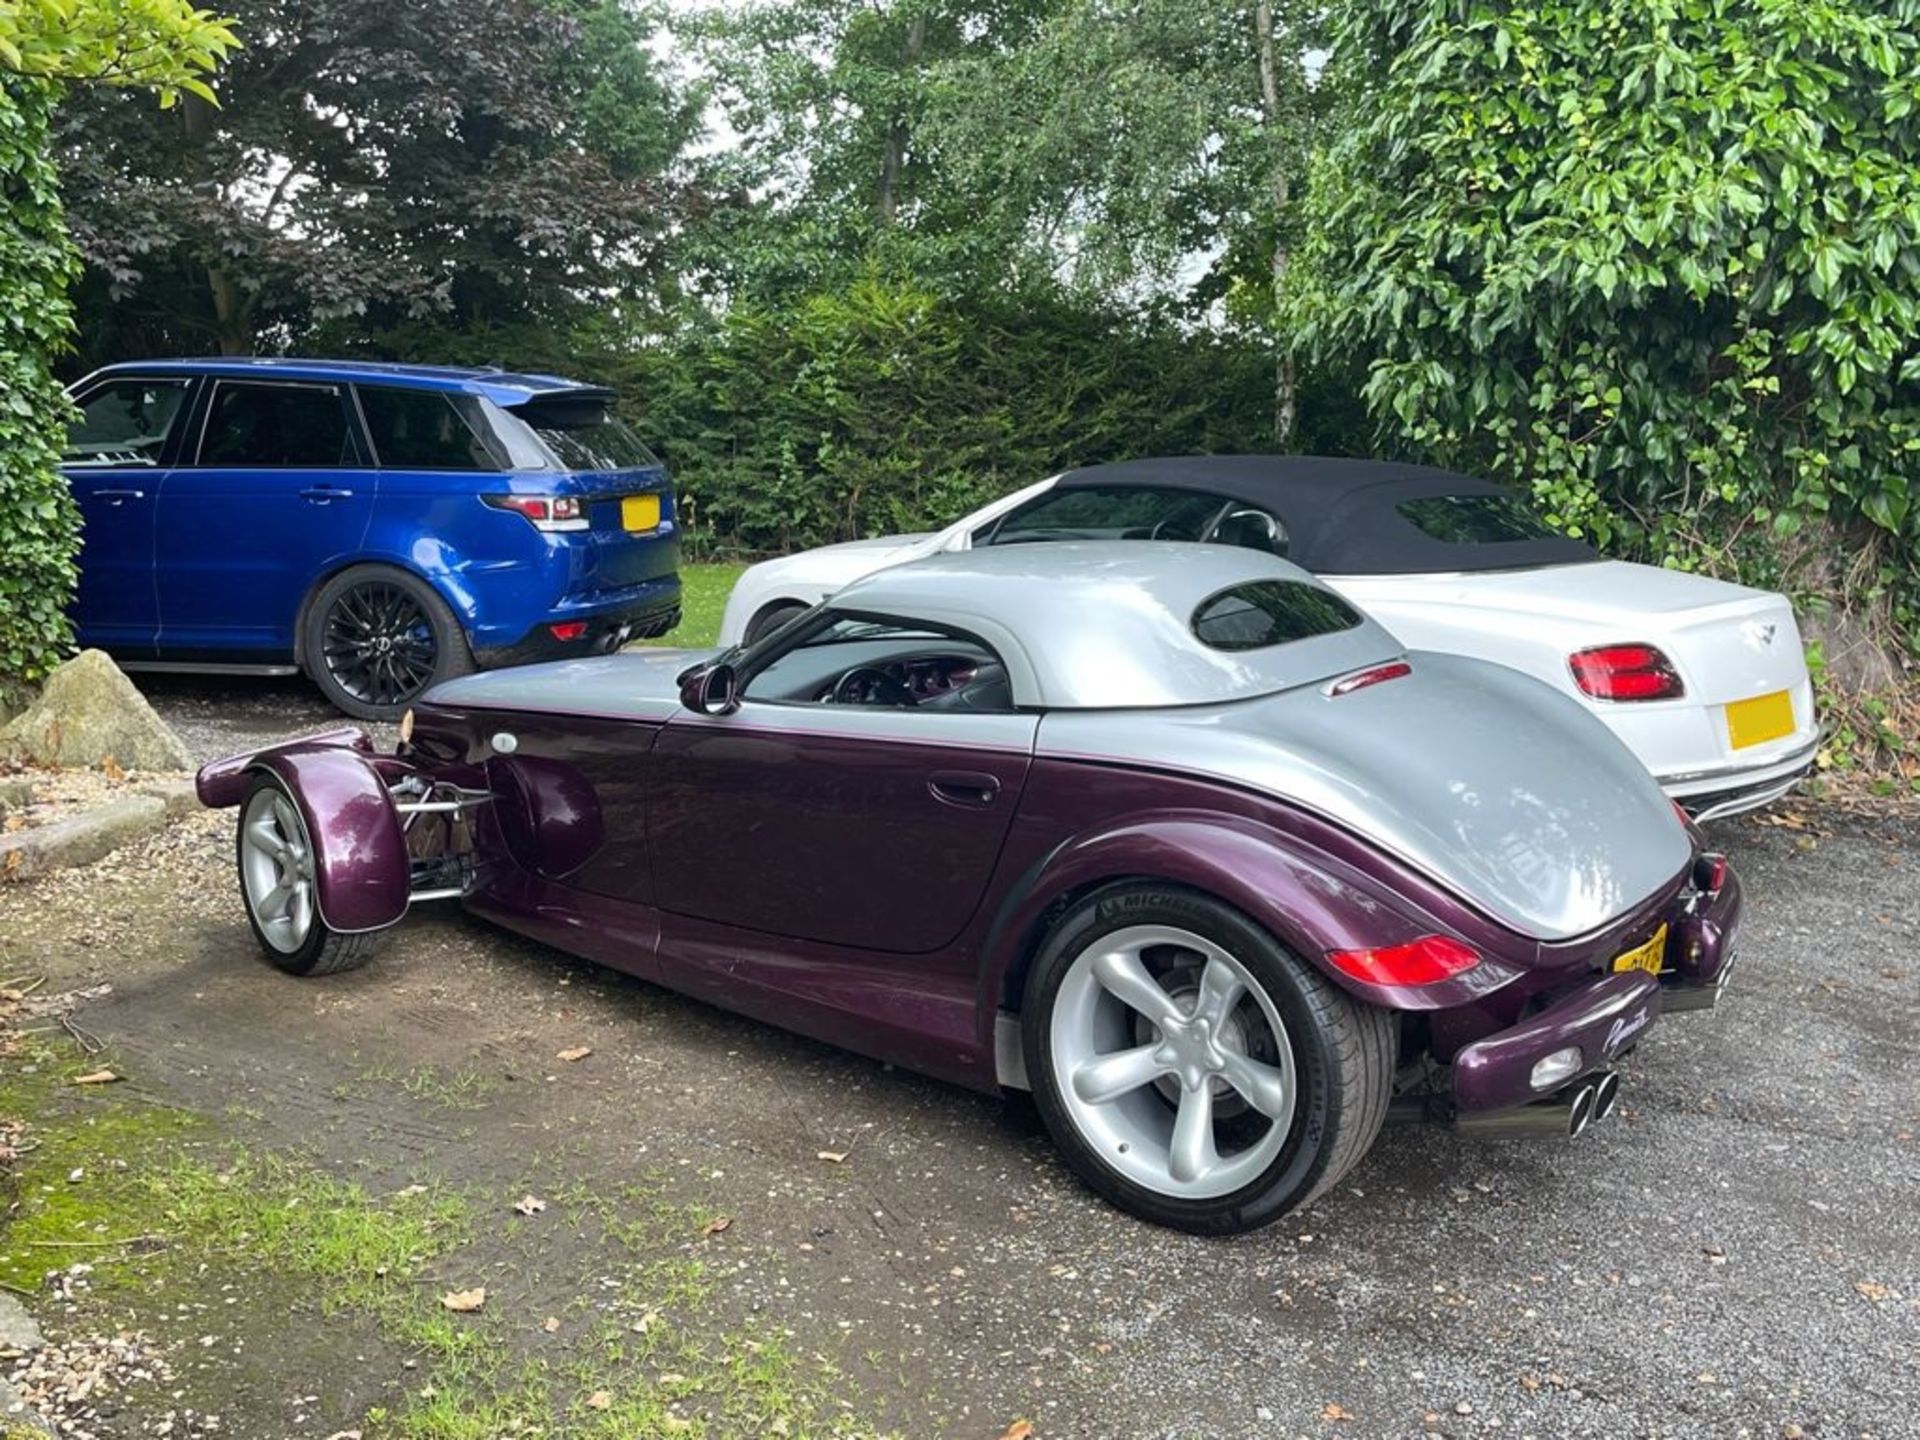 1998 CHRYSLER PLYMOUTH PROWLER V6 2 DOOR CONVERTIBLE, 3500cc PETROL ENGINE, AUTO *NO VAT* - Image 20 of 27